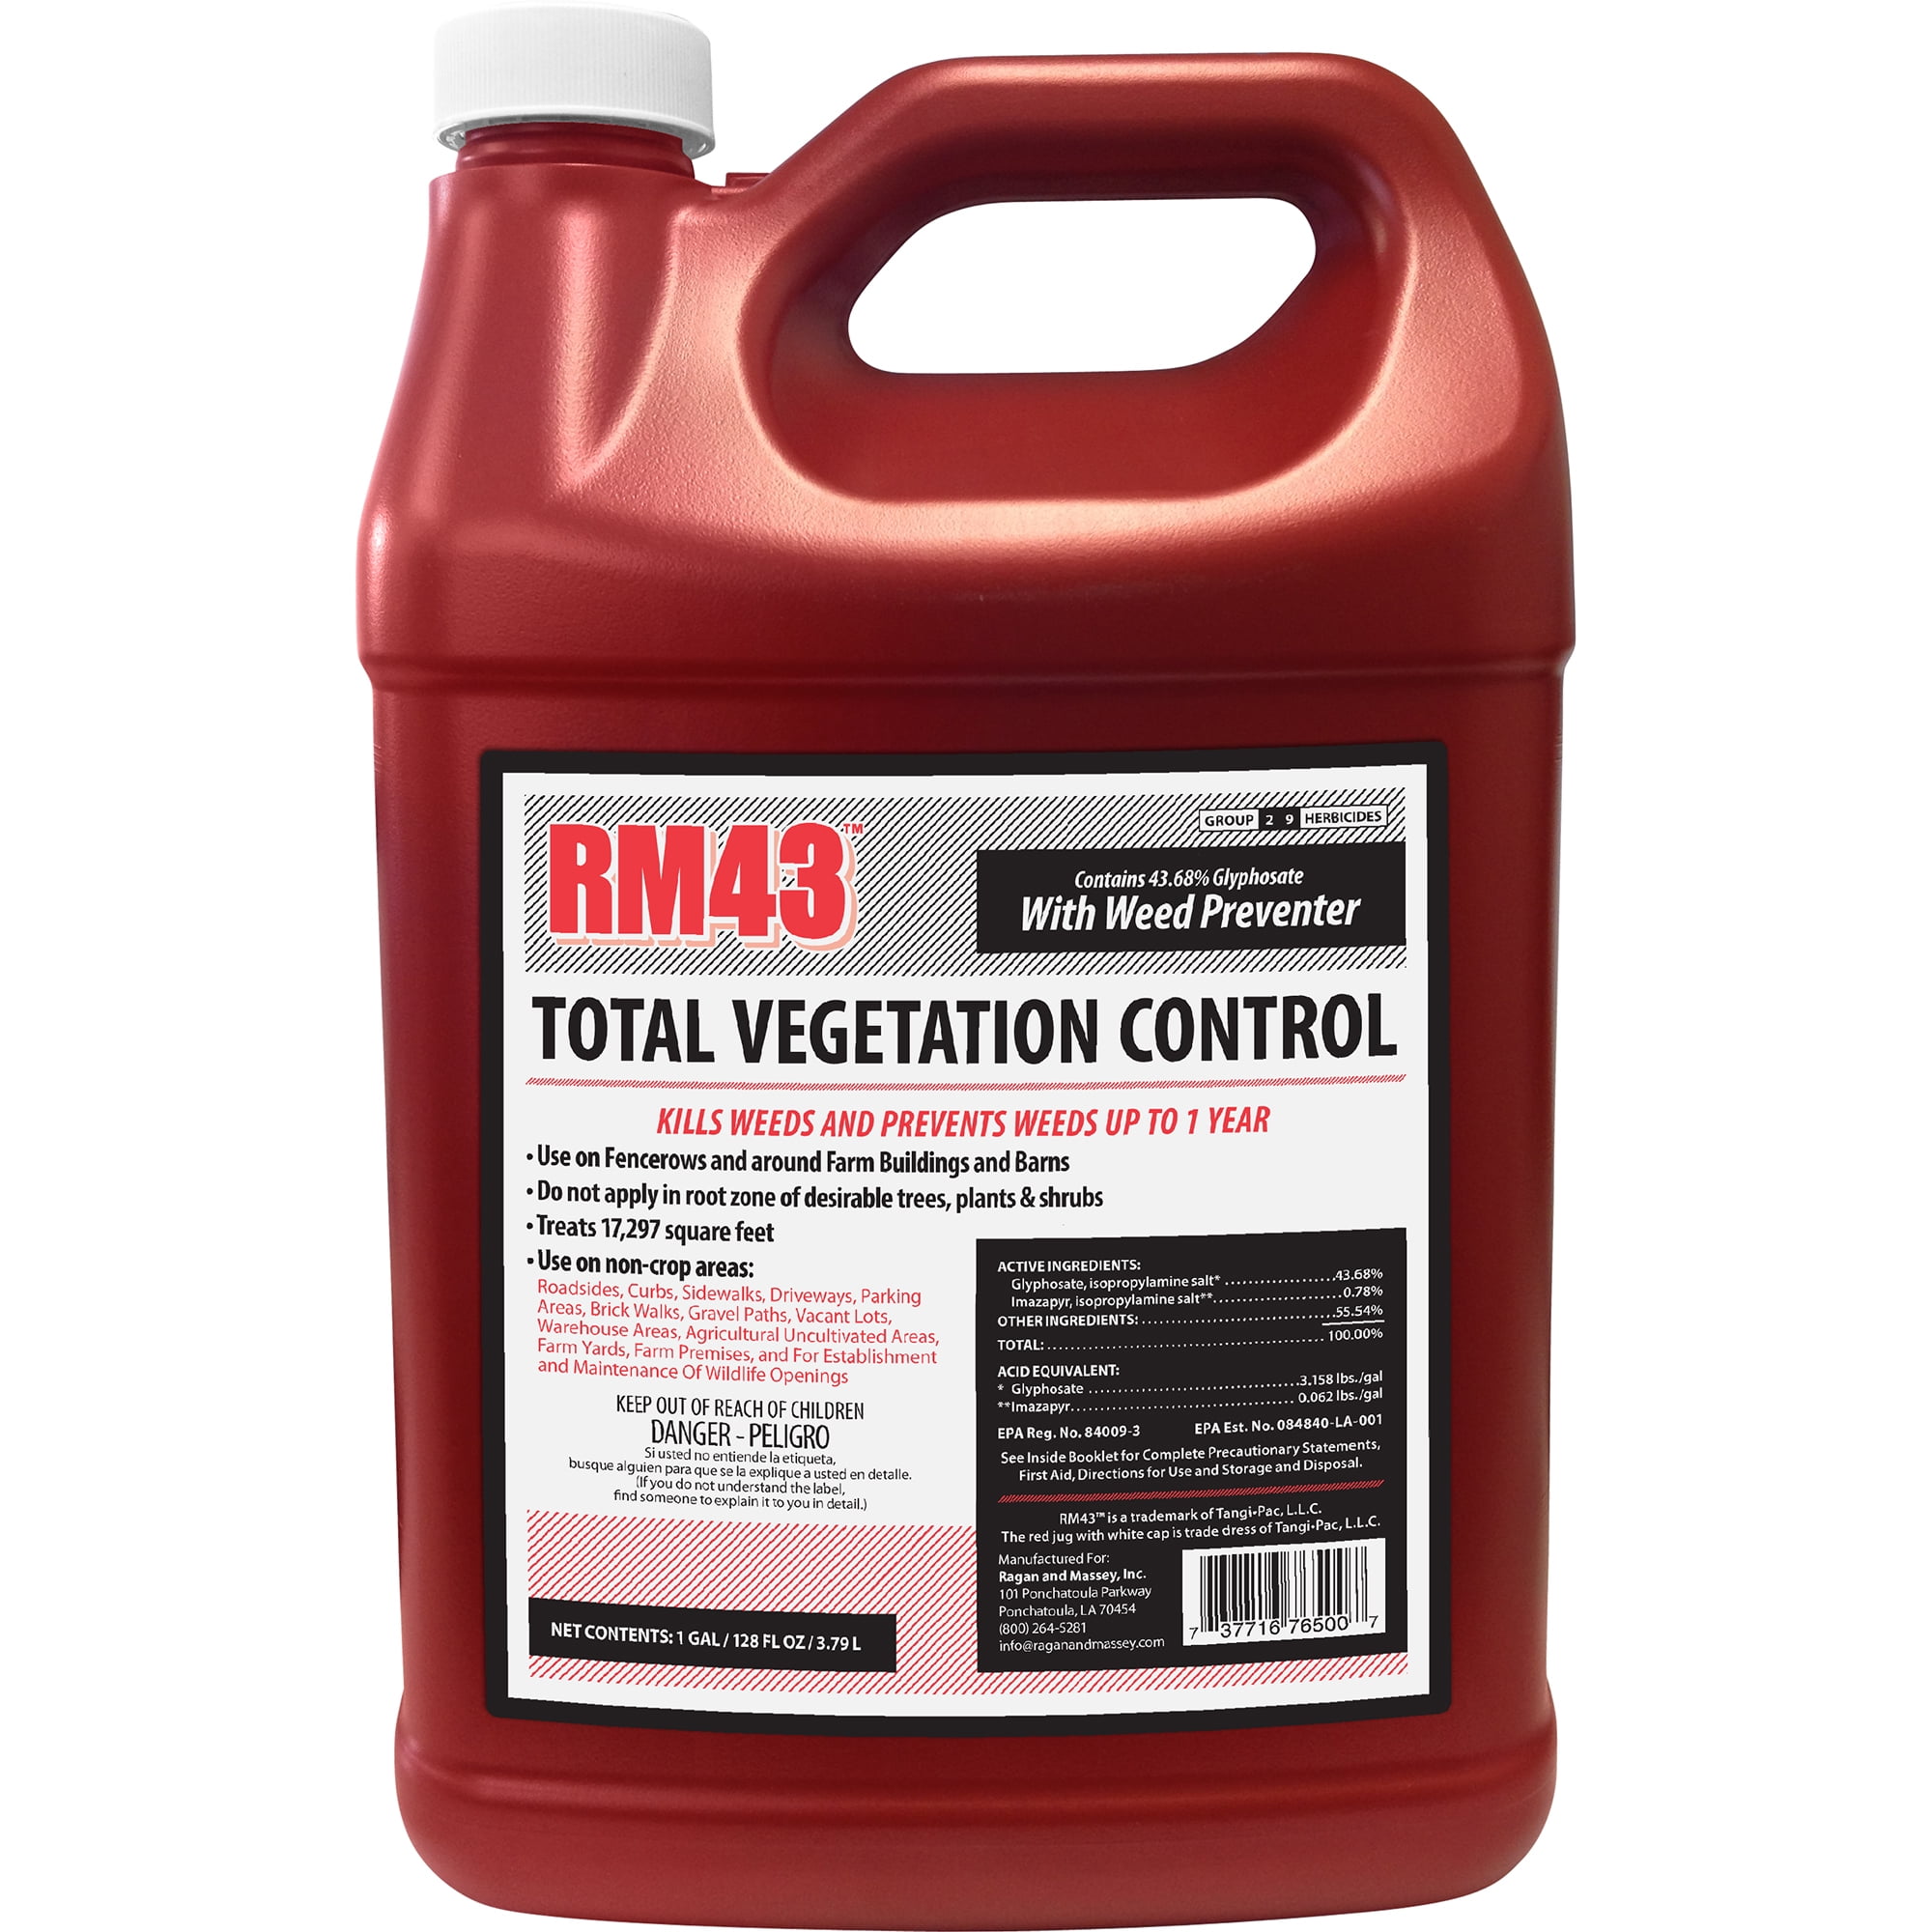 Picture of Ragan & Massey 015045 1 gal 43-Percent Glyphosate Plus Weed Preventer Total Vegetation Control